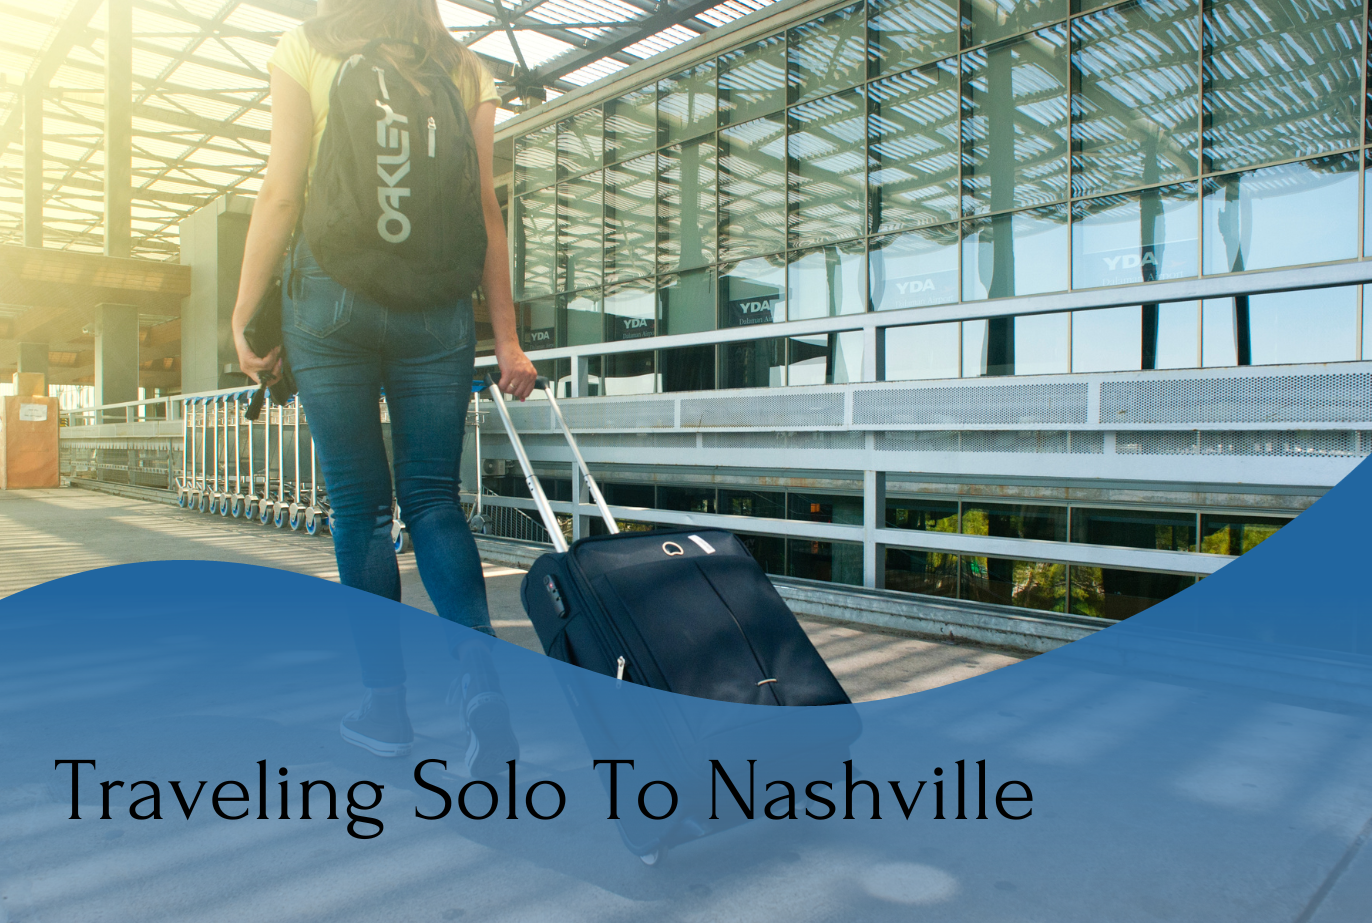 Embarking on a solo Nashville tour.